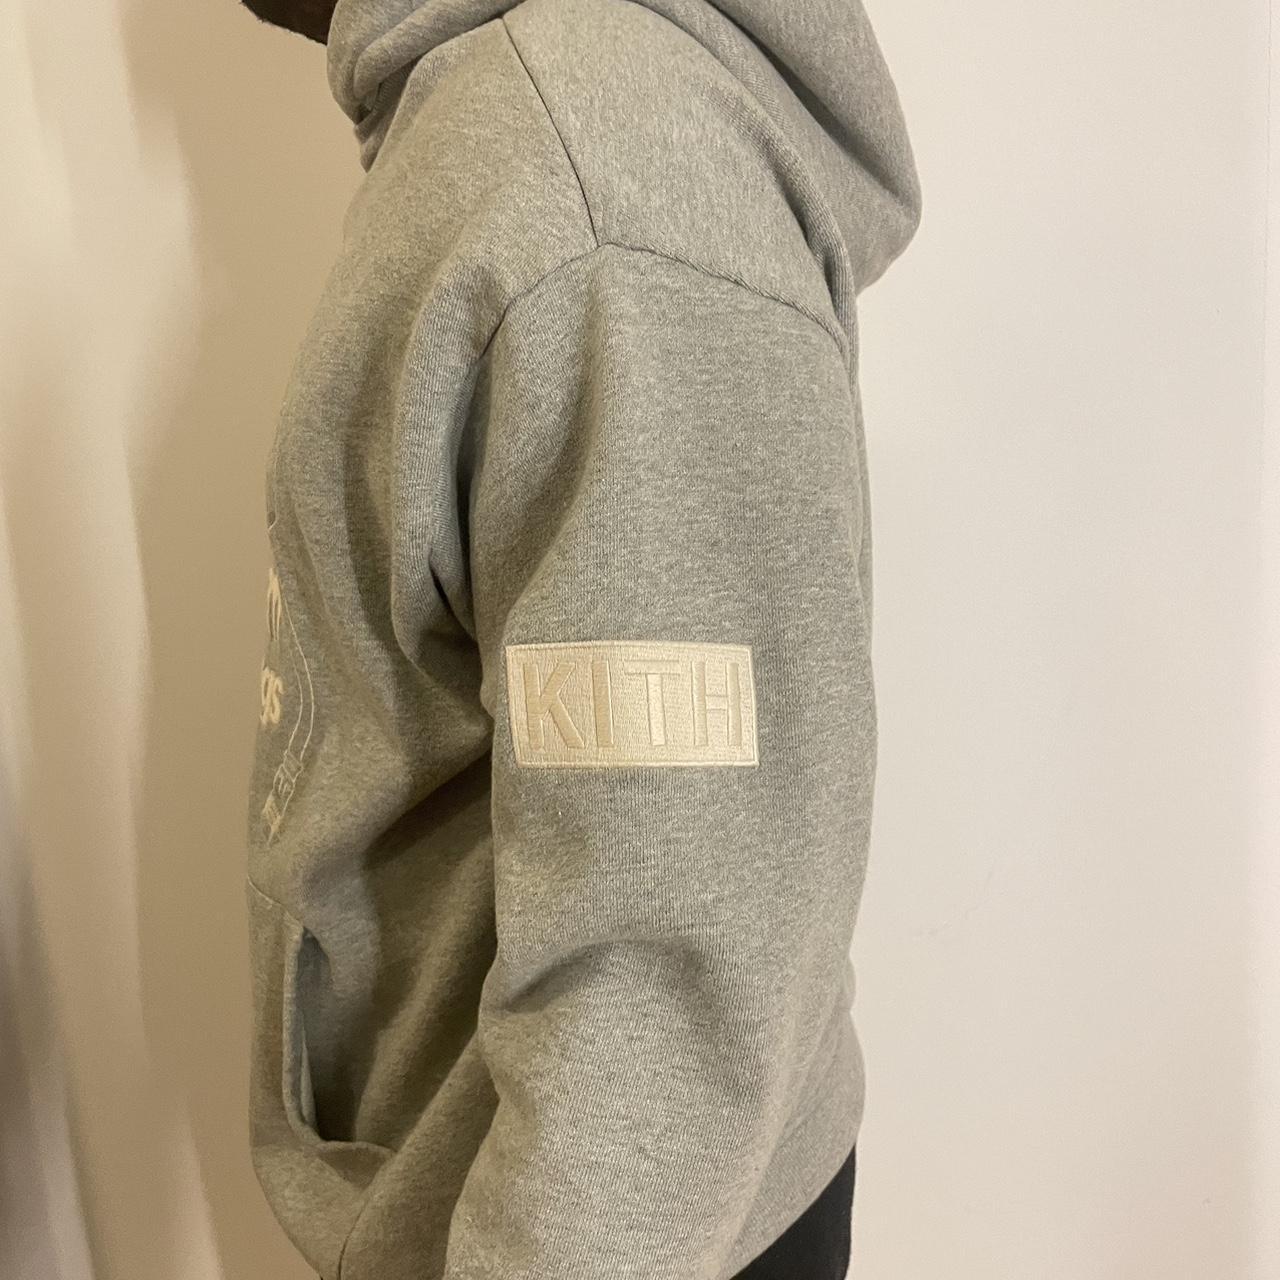 Kith Def Jam Limited Edition Hoodie. Size M but fits...